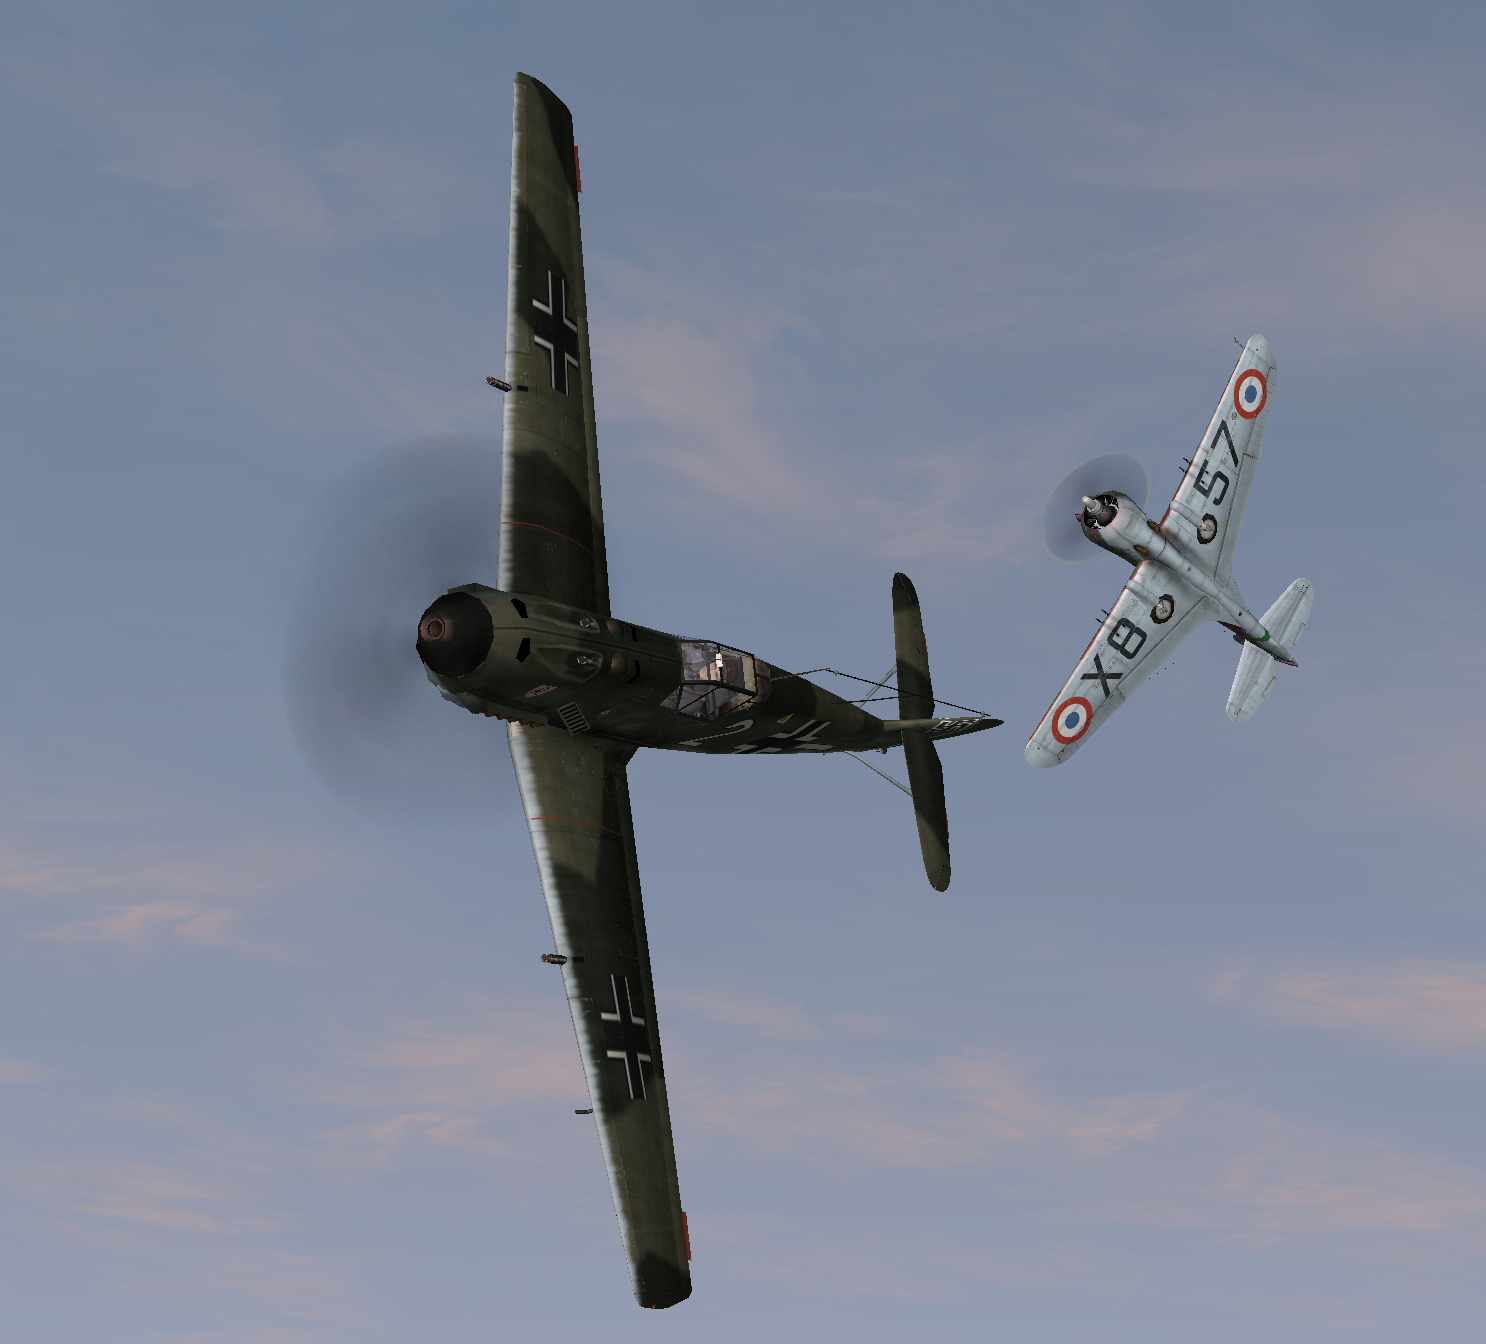 Winter 1939. H75 and Bf109 in dogfight